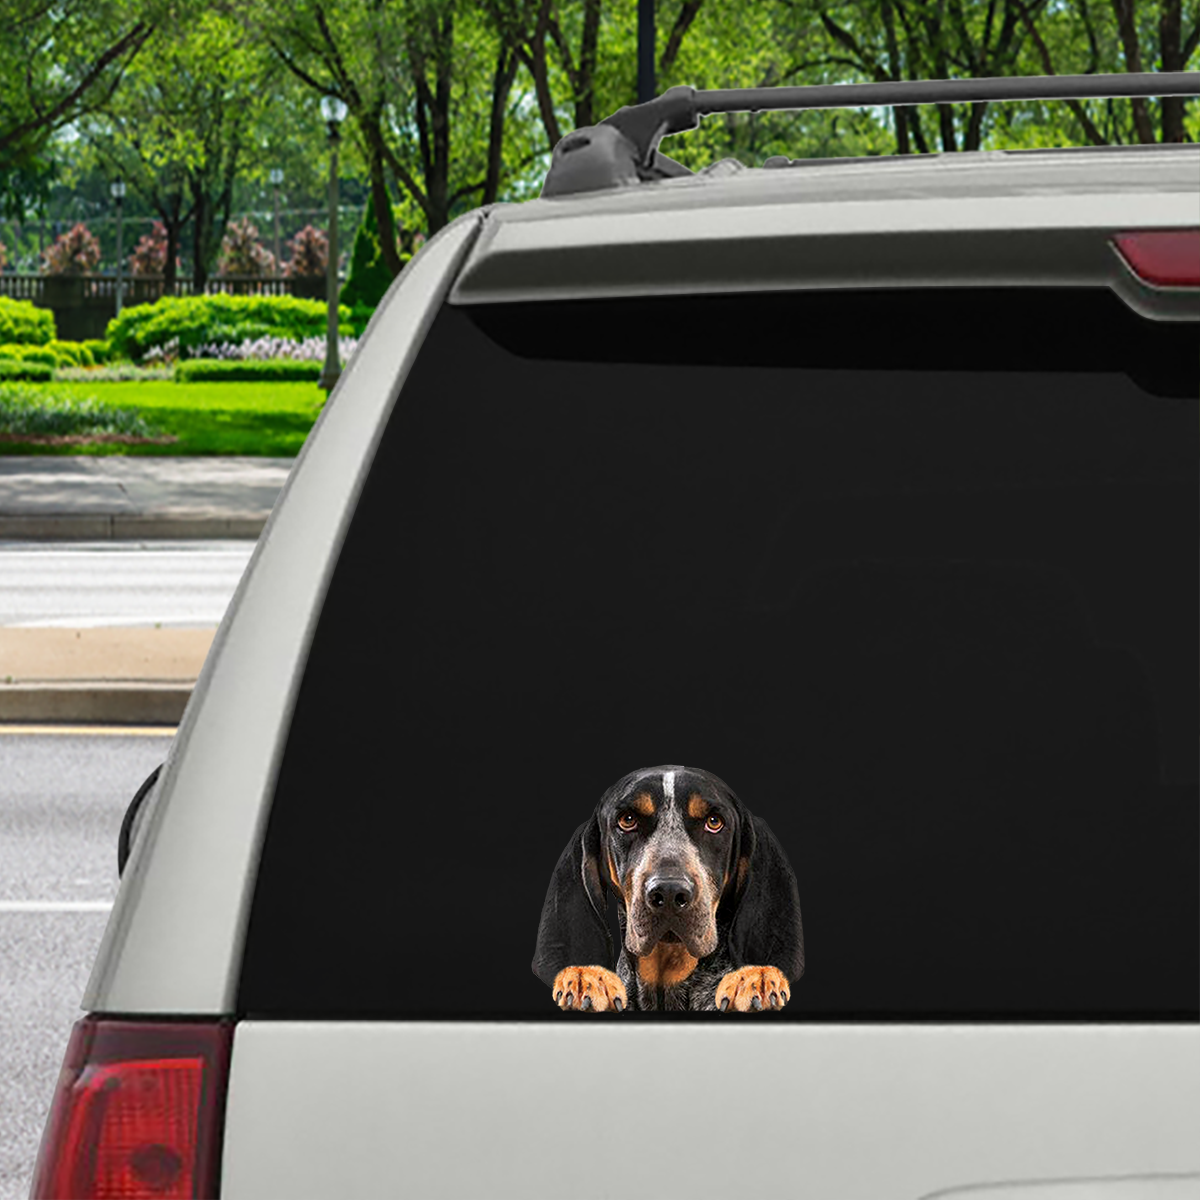 Can You See Me Now - Bluetick Coonhound Car/ Door/ Fridge/ Laptop Sticker V1